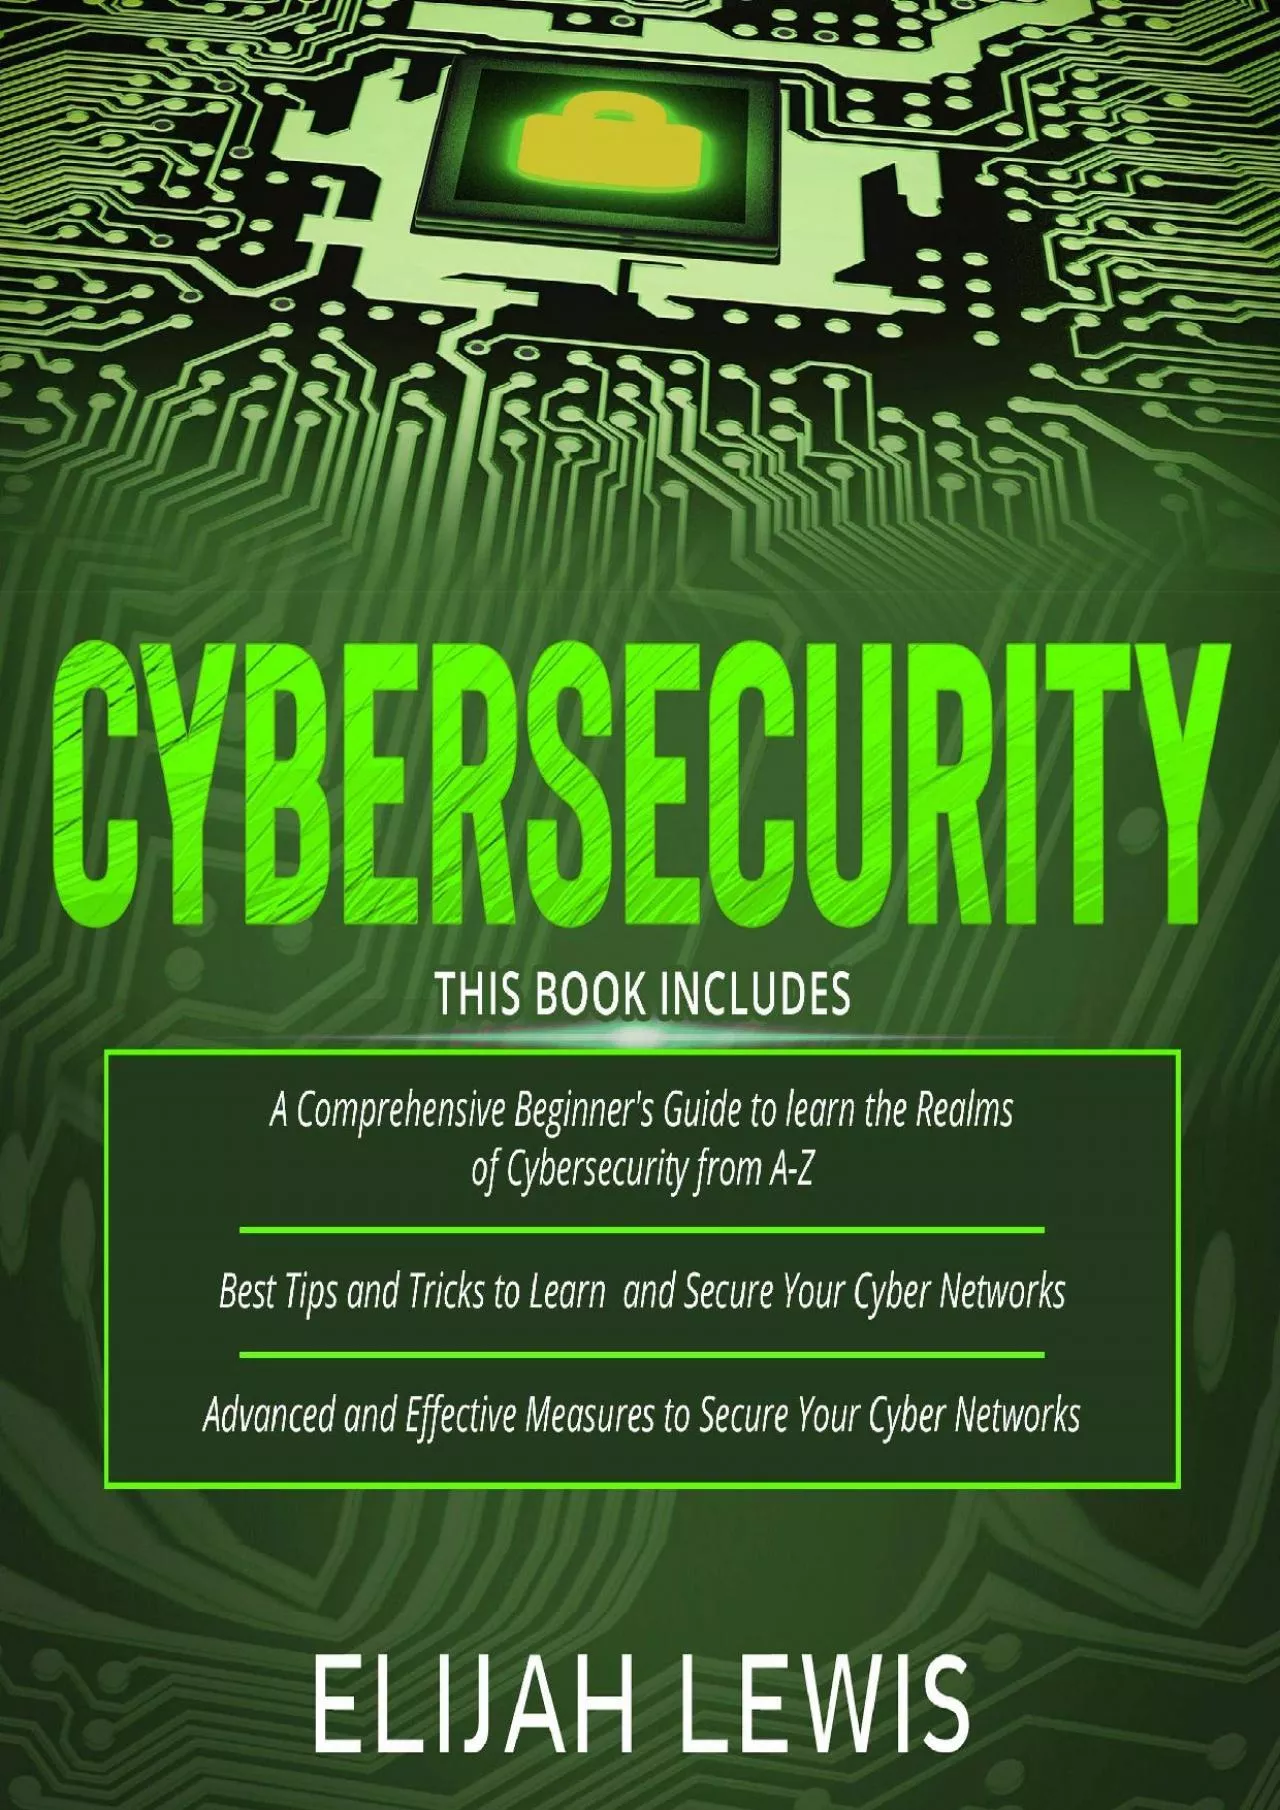 [READING BOOK]-Cybersecurity: 3 in 1: Beginner\'s Guide + Tips and Tricks + Advanced and